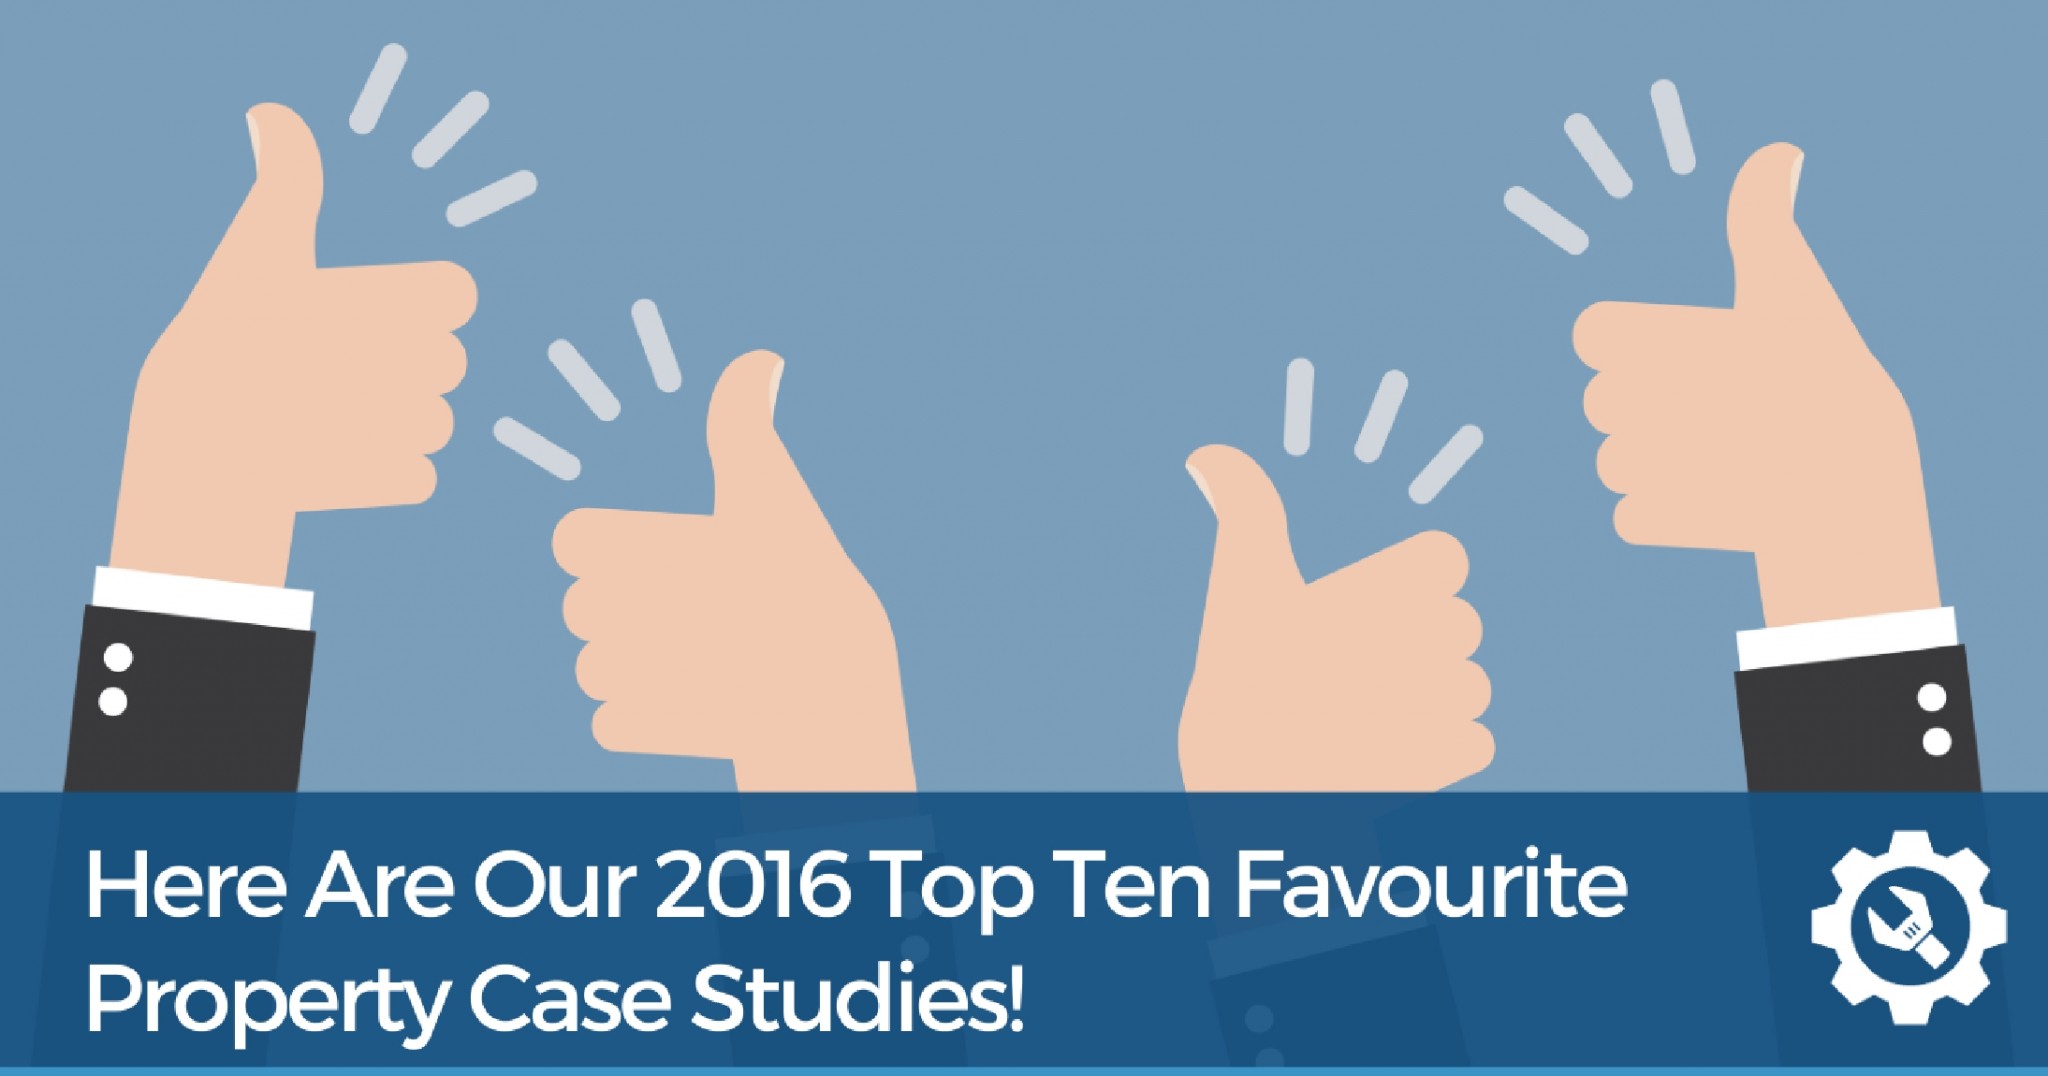 Here Are Our Top Ten Favourite Property Case Studies From 2016